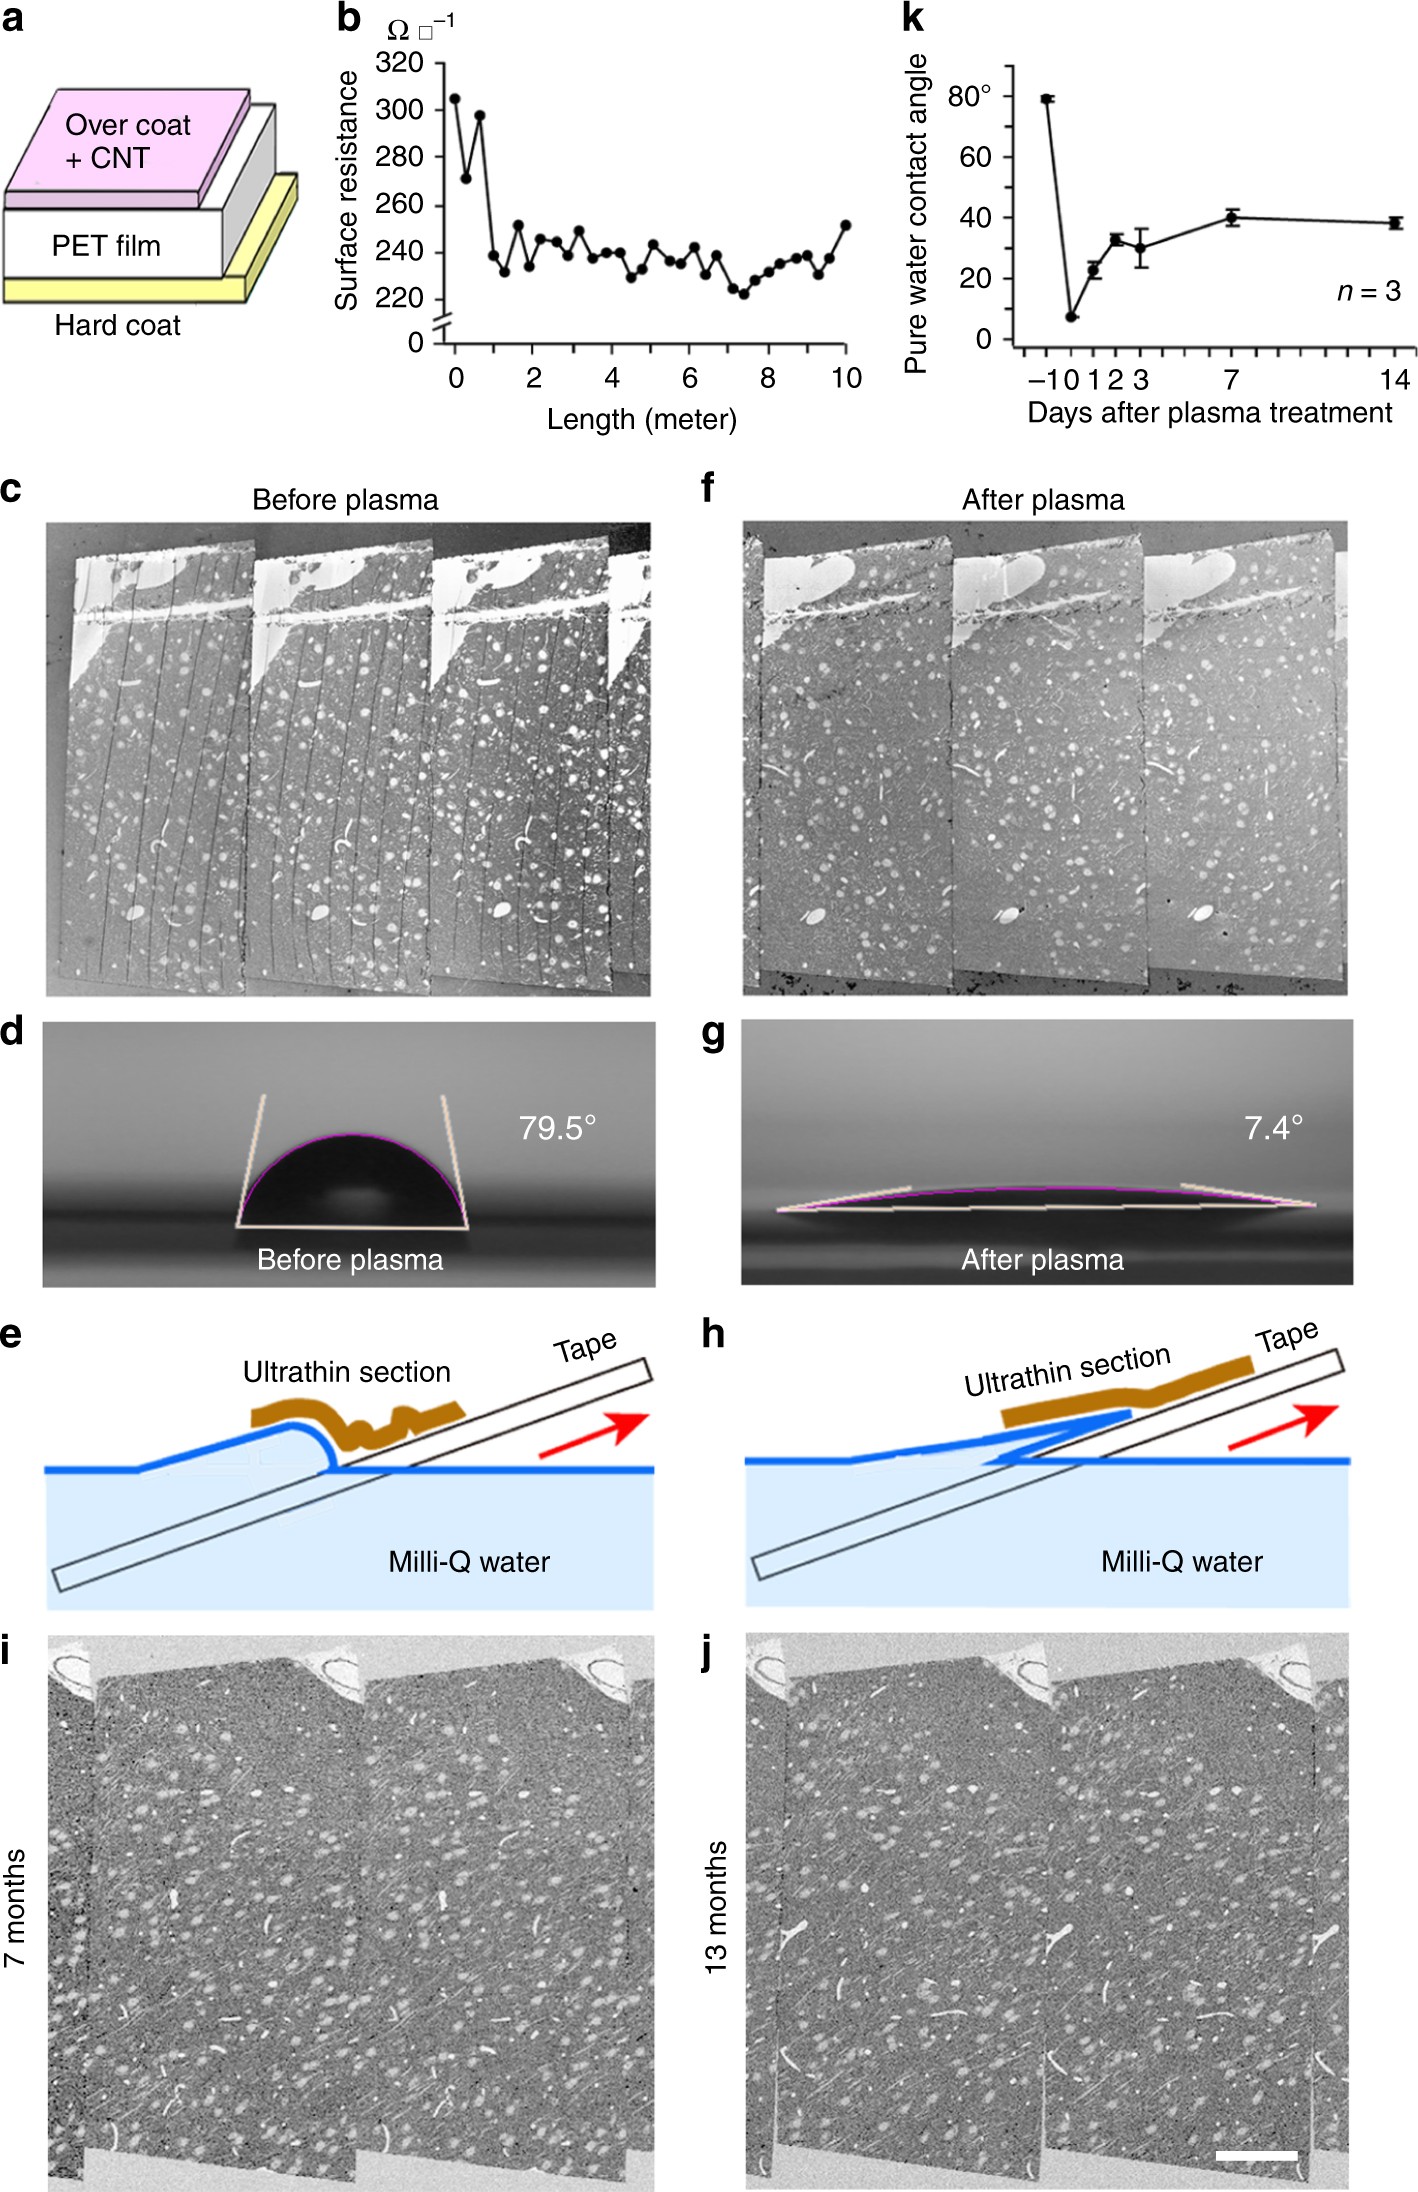 A carbon nanotube tape for serial-section electron microscopy of